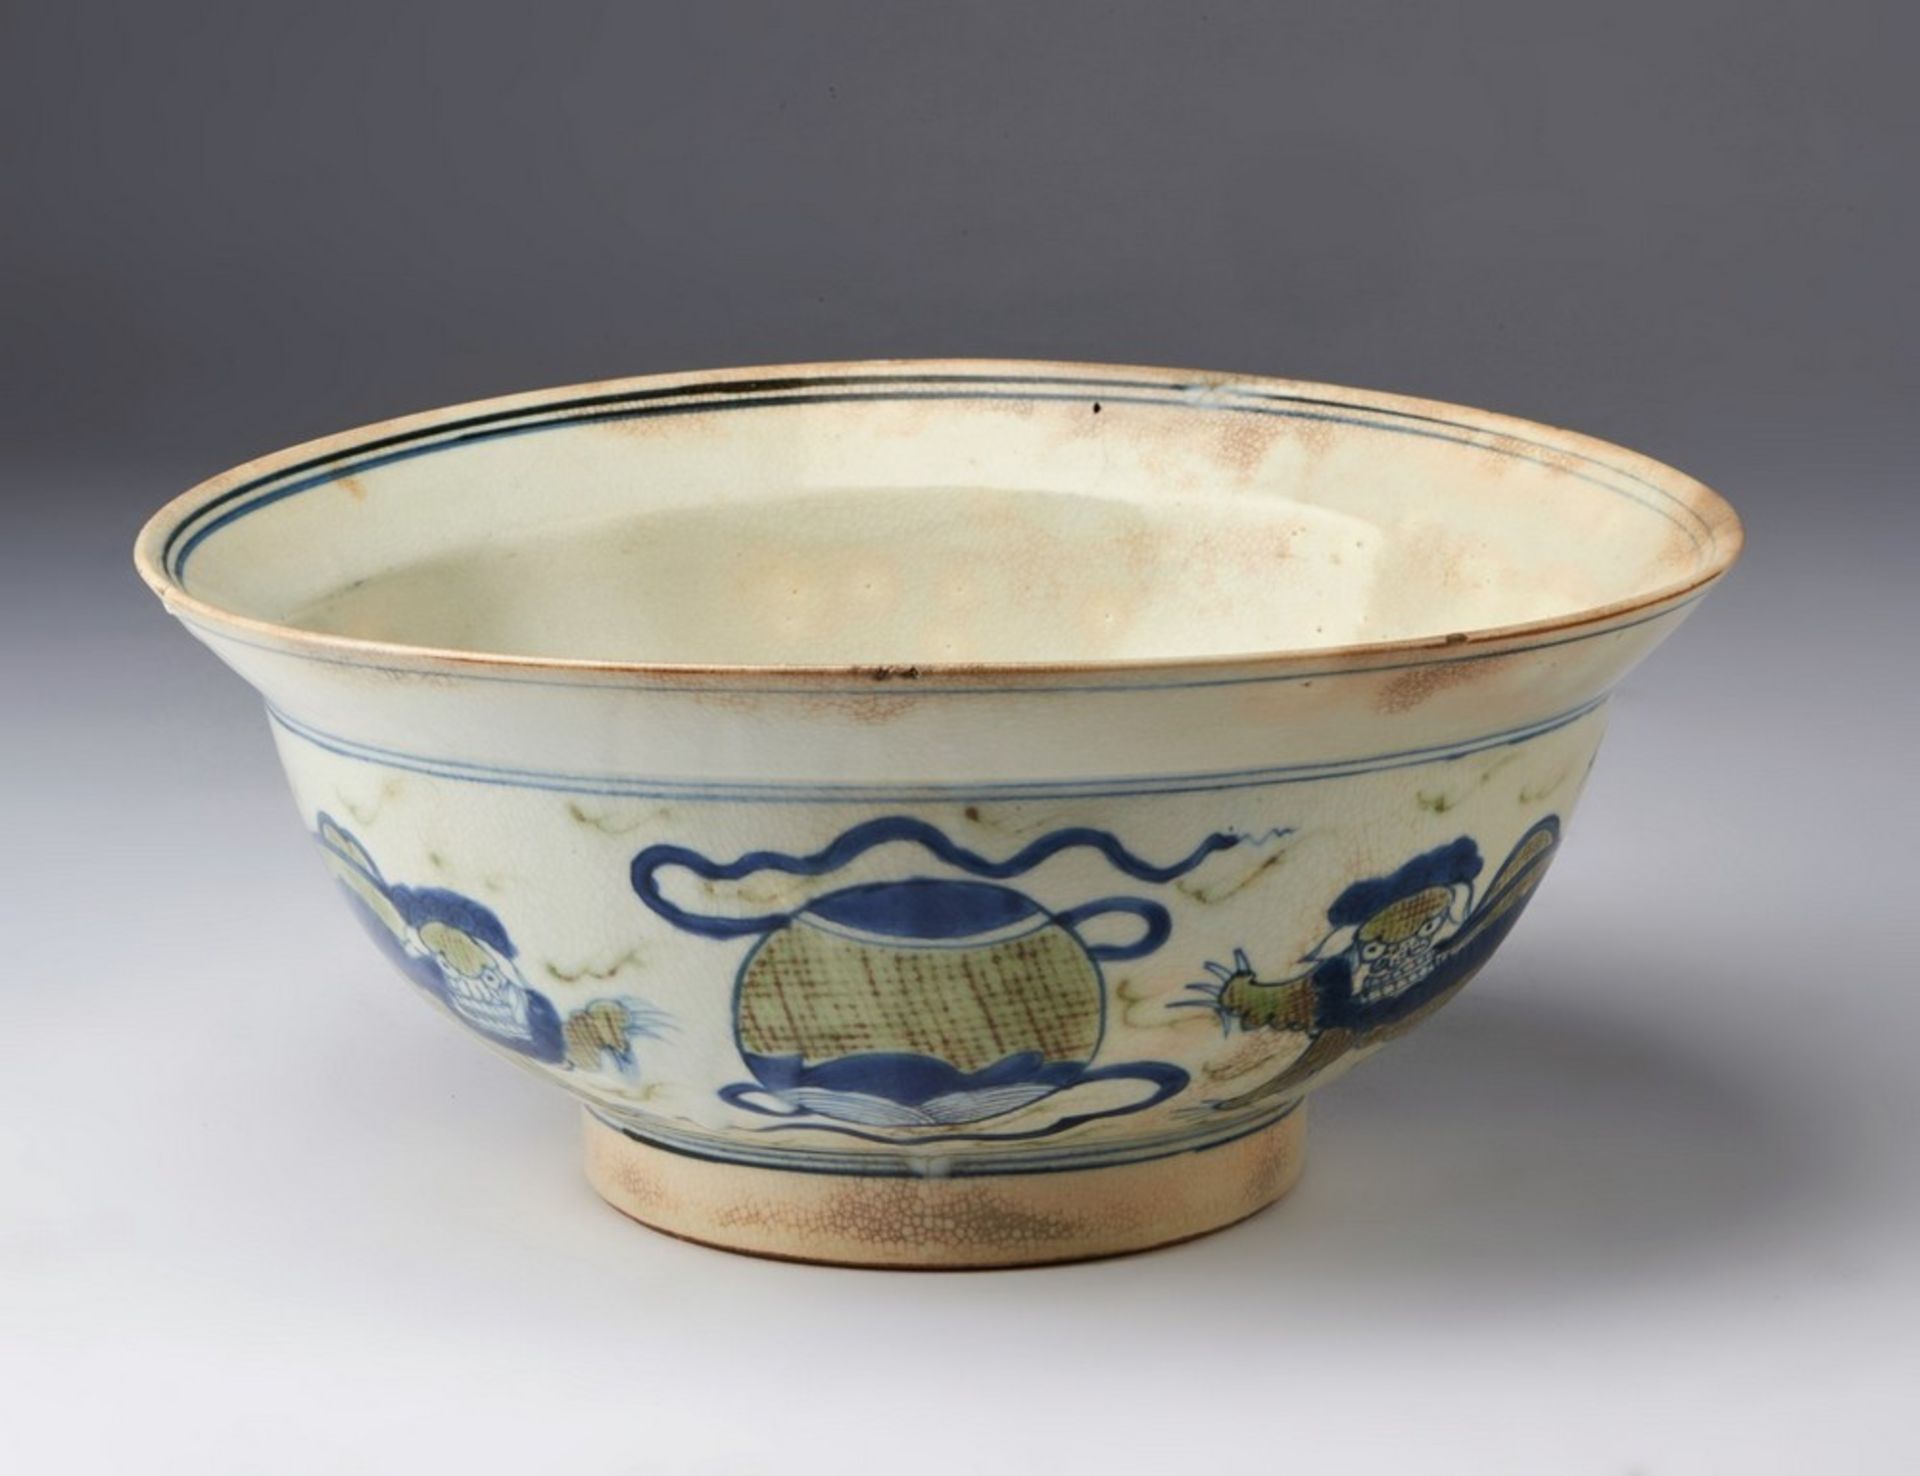 Arte Islamica A Ming Chinese style pottery bowl Possibly Safavid Iran, 17th century . - Image 2 of 4